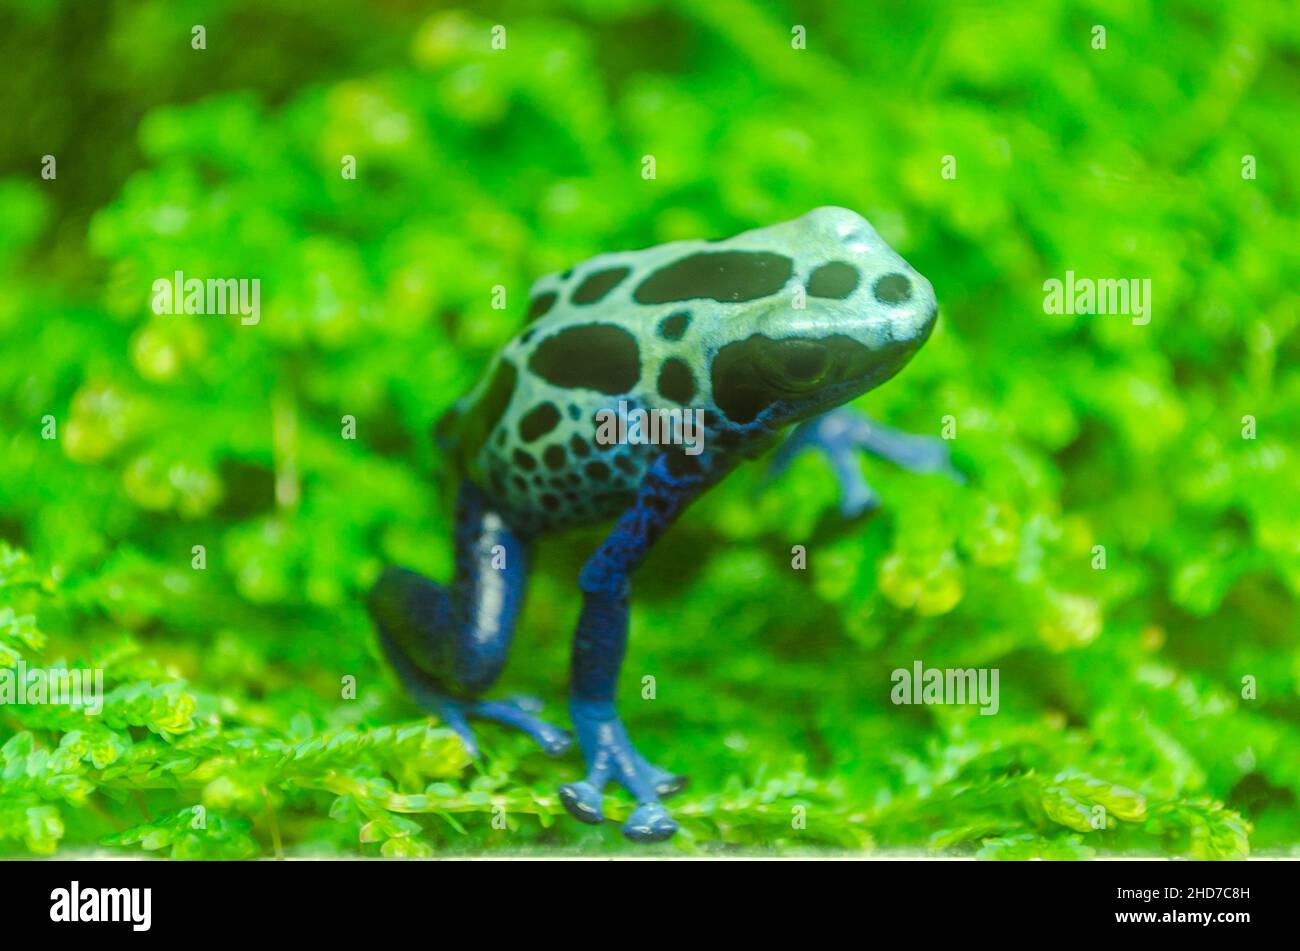 Blue Tropical Poison Dart Frog Sitting on Green Leaves in a Zoo Glass Cage. Wildlife Photography. Stock Photo